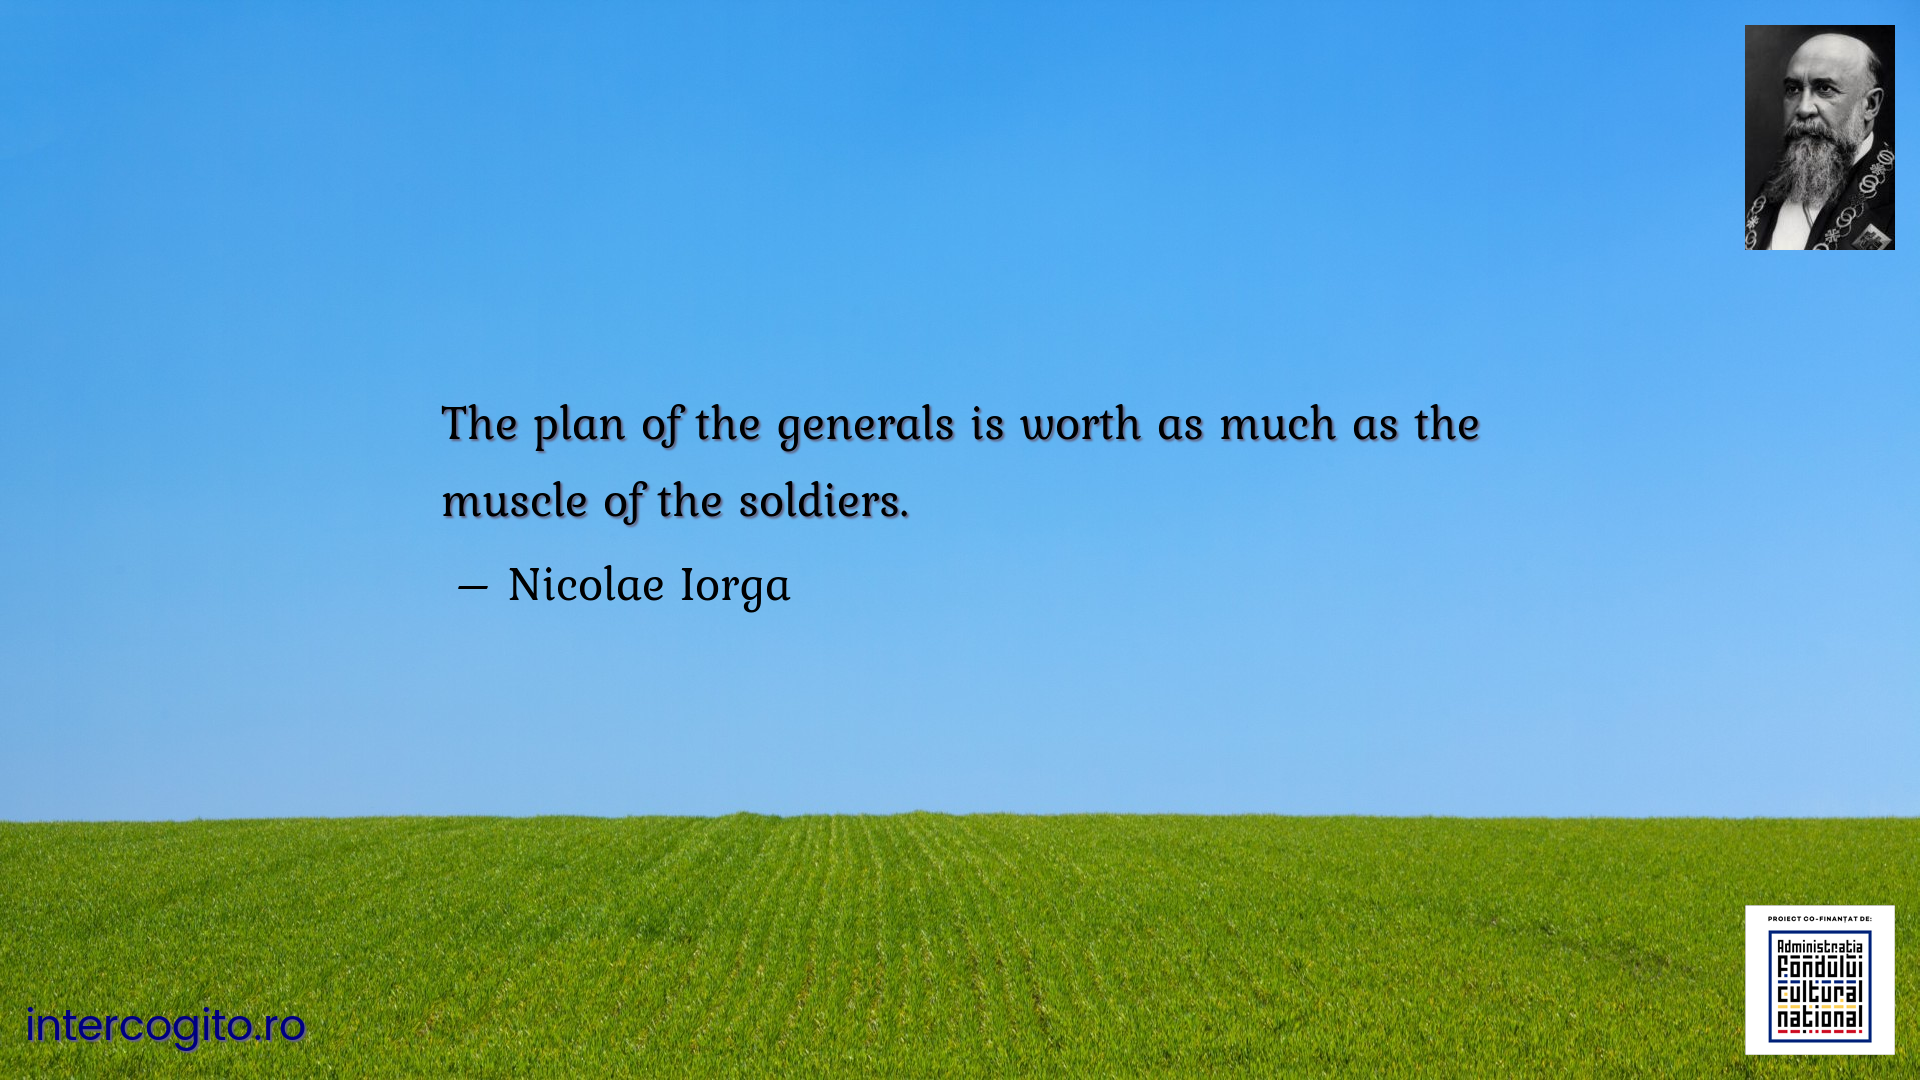 The plan of the generals is worth as much as the muscle of the soldiers.